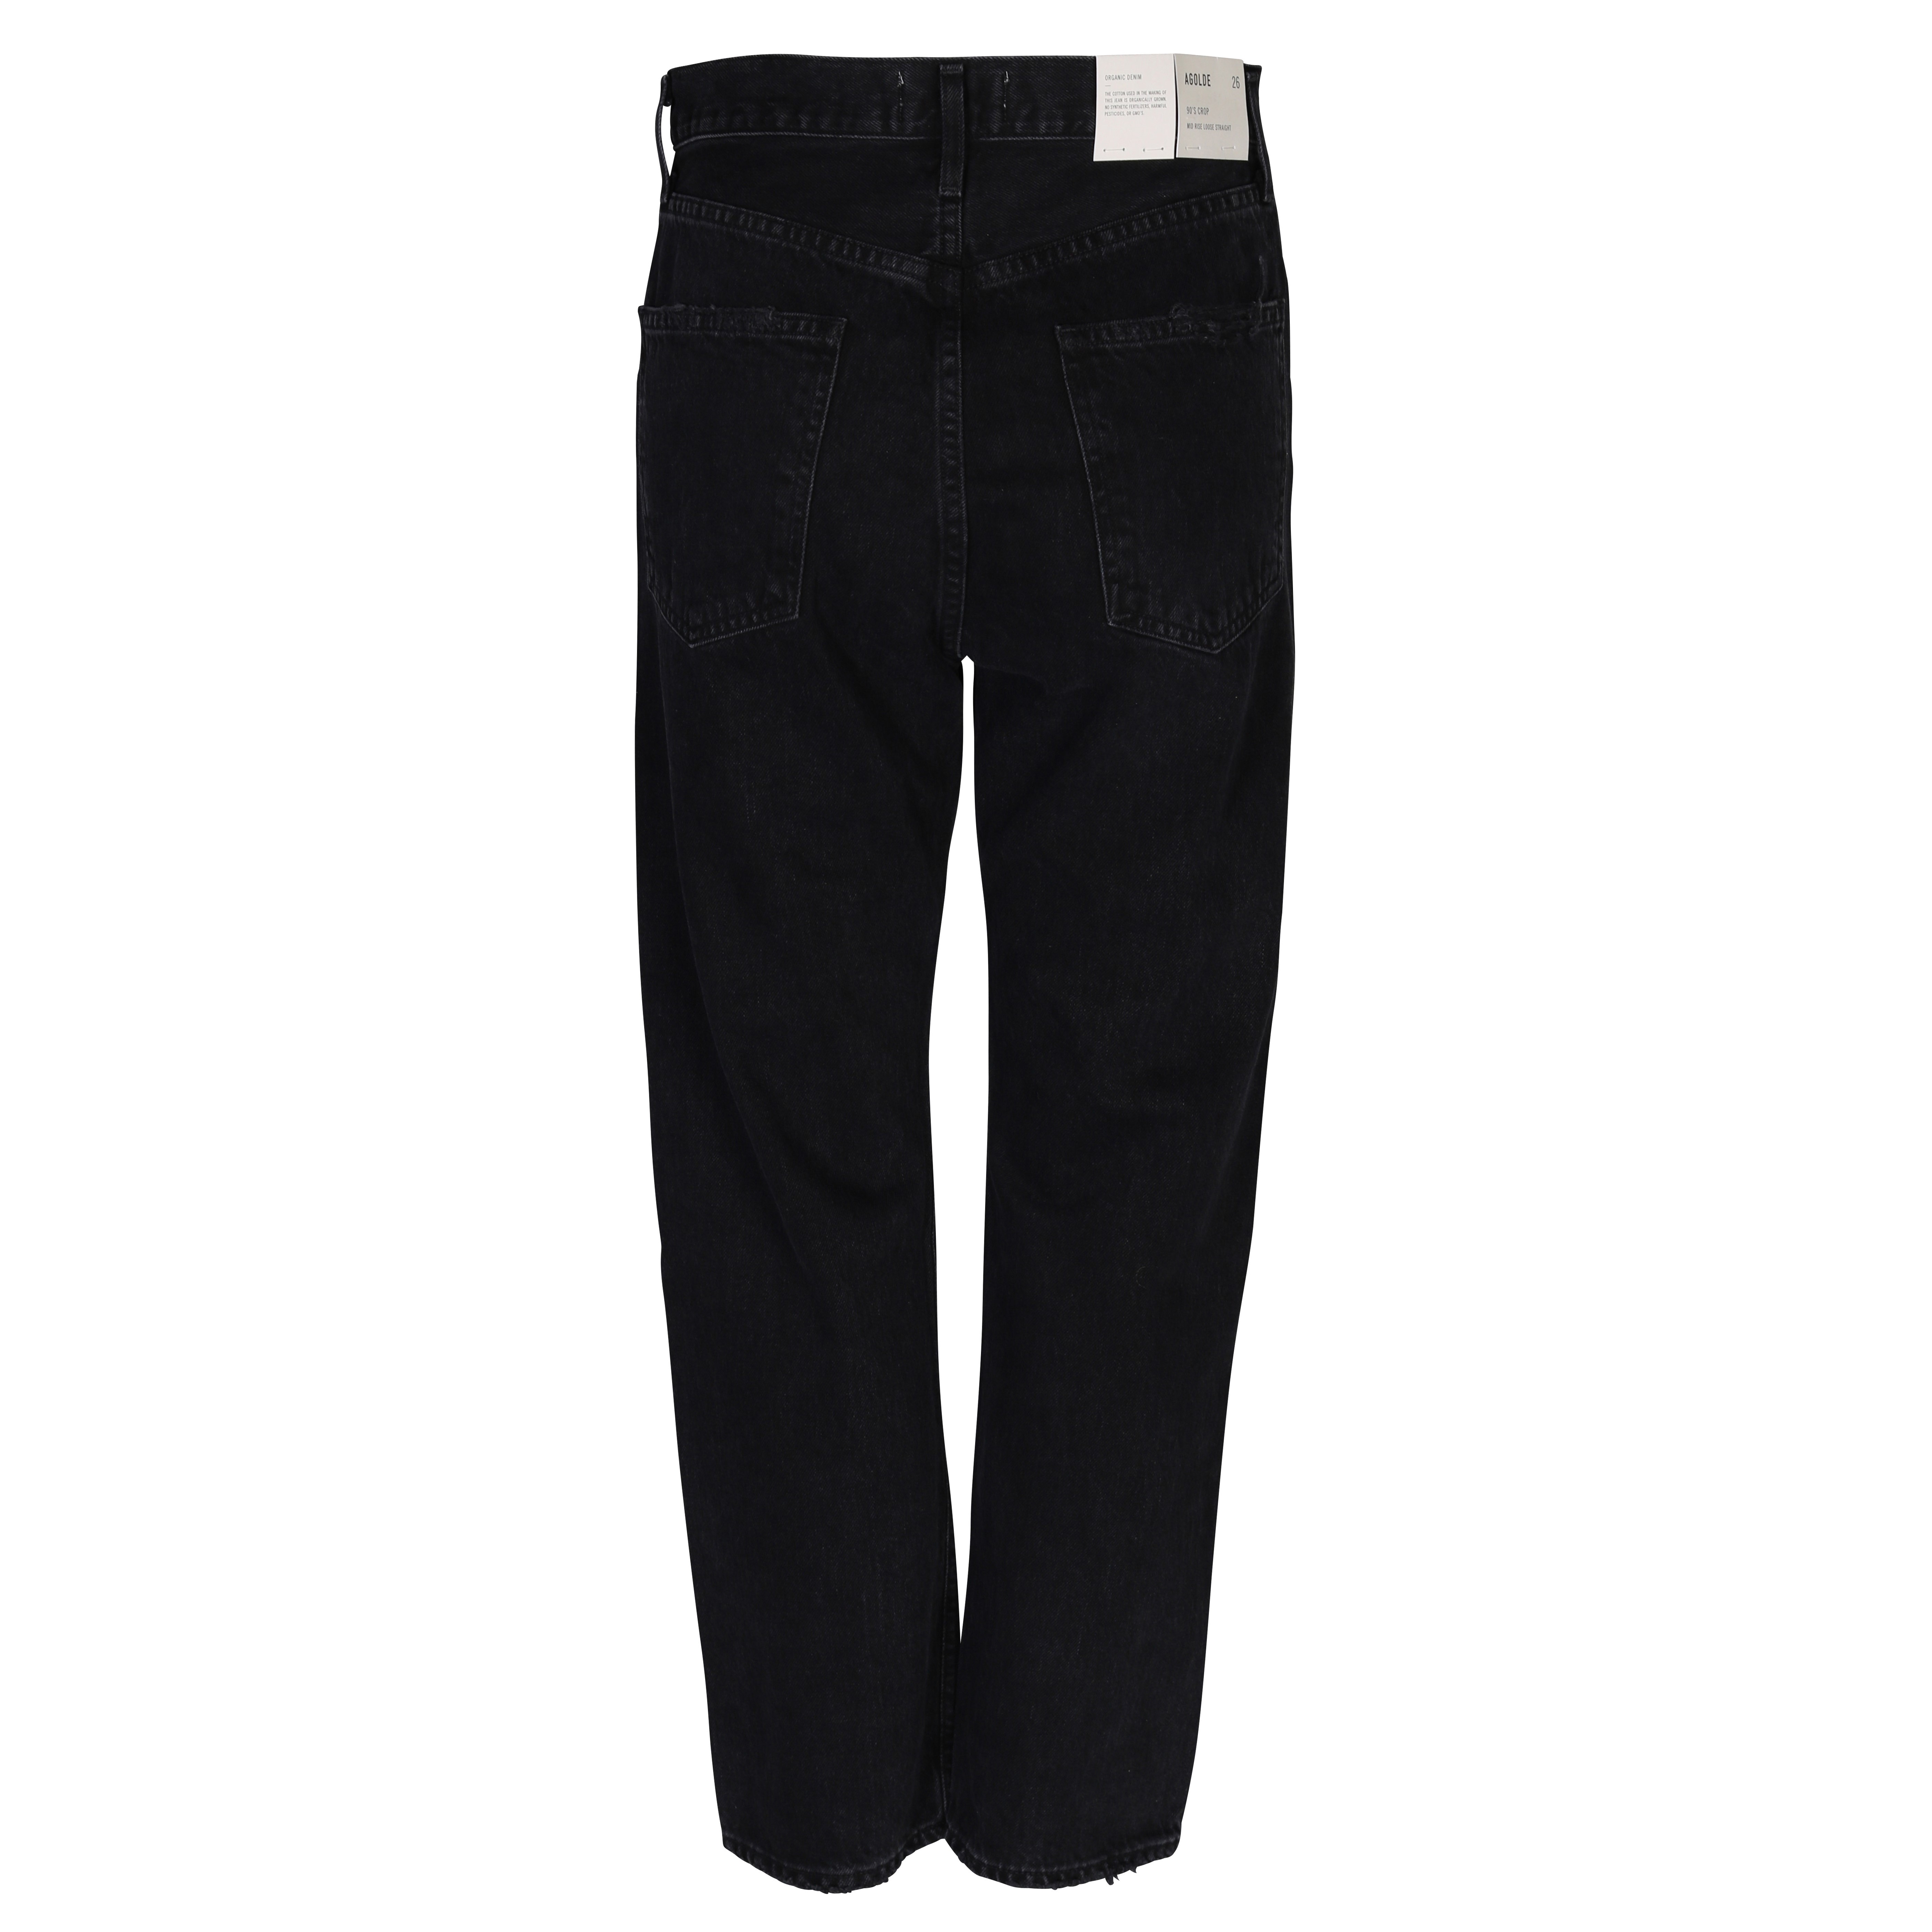 Agolde Jeans 90s Cropped in Black/Bauhaus Washed W 26